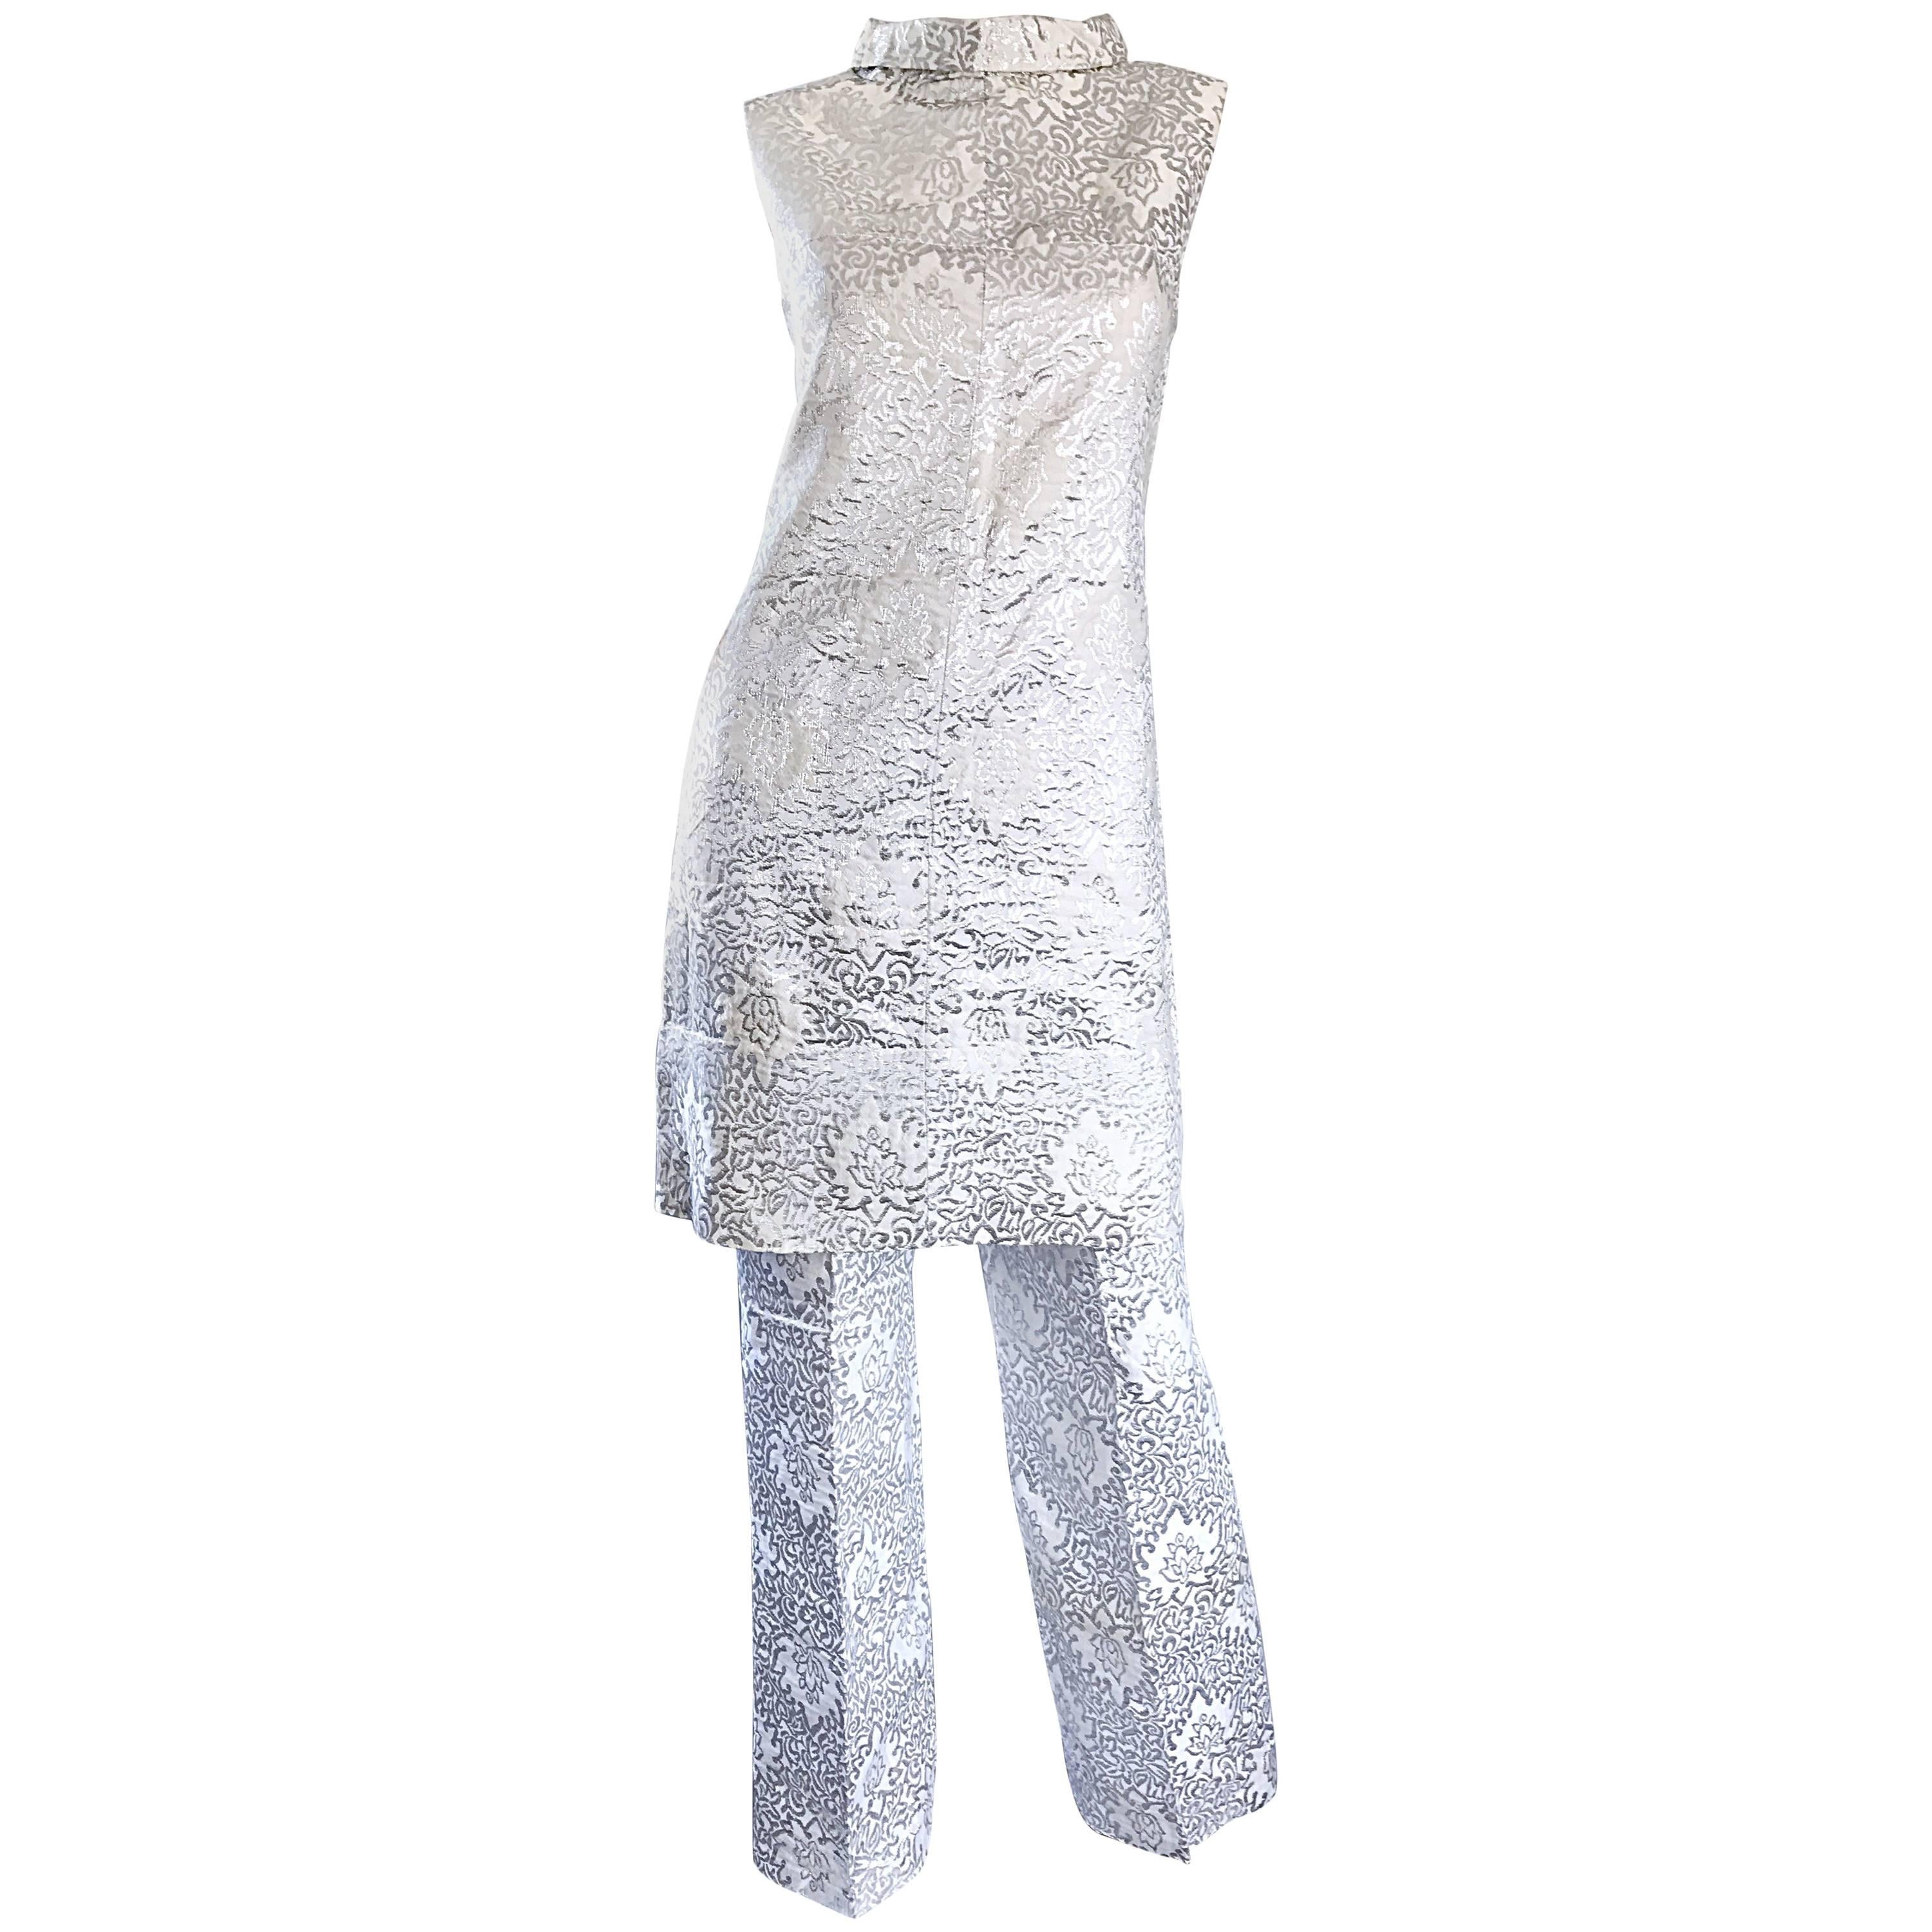 1960s Silver and White Silk Jacquard Metallic Vintage 60s Tunic Dress and Pants